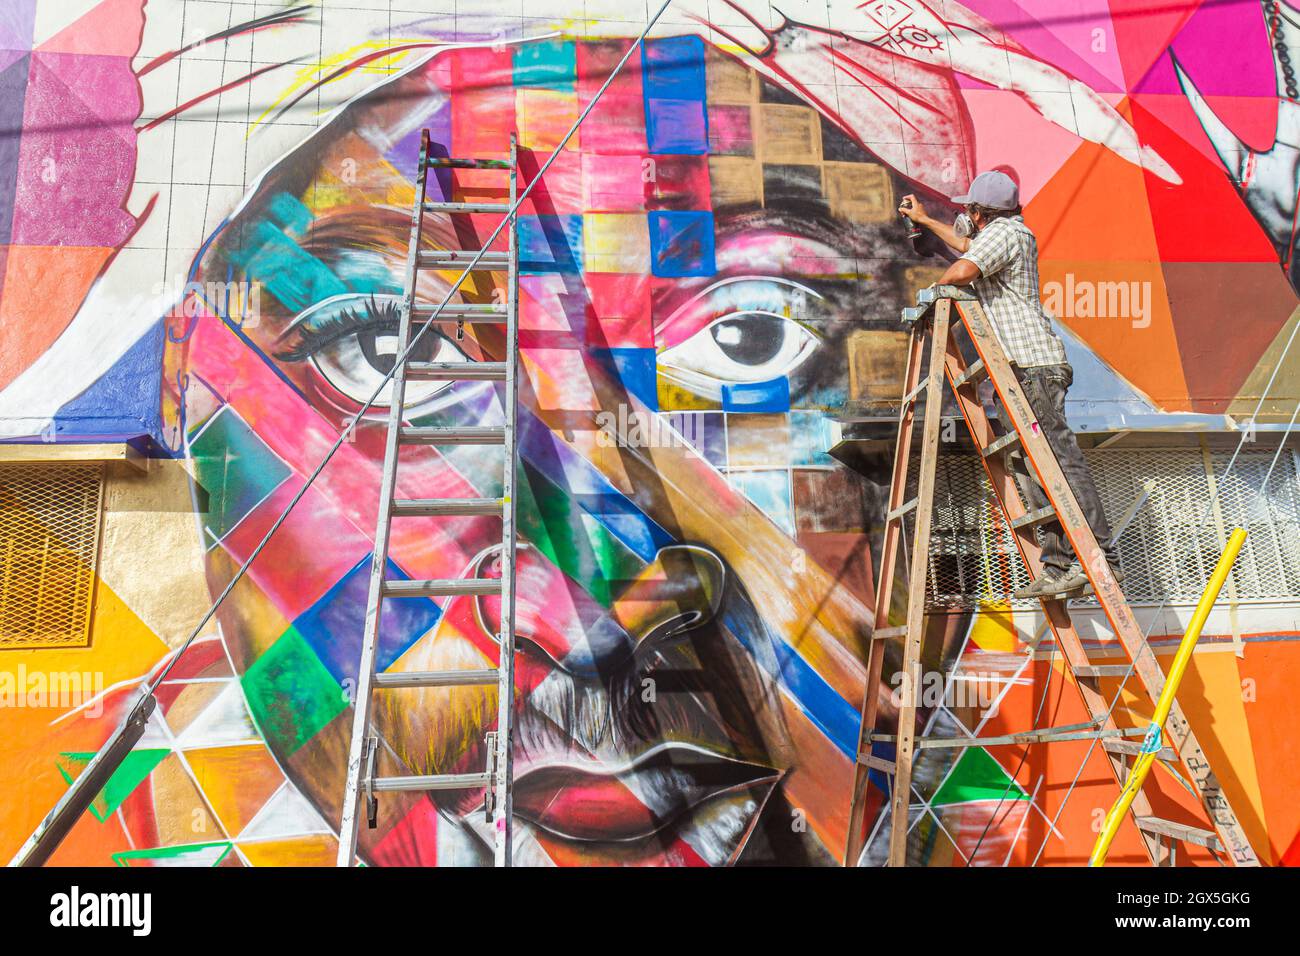 Miami Florida,Wynwood Art District Basel,muralist wall mural spray painting Black man male,artist painter contemporary artwork colorful using ladders Stock Photo